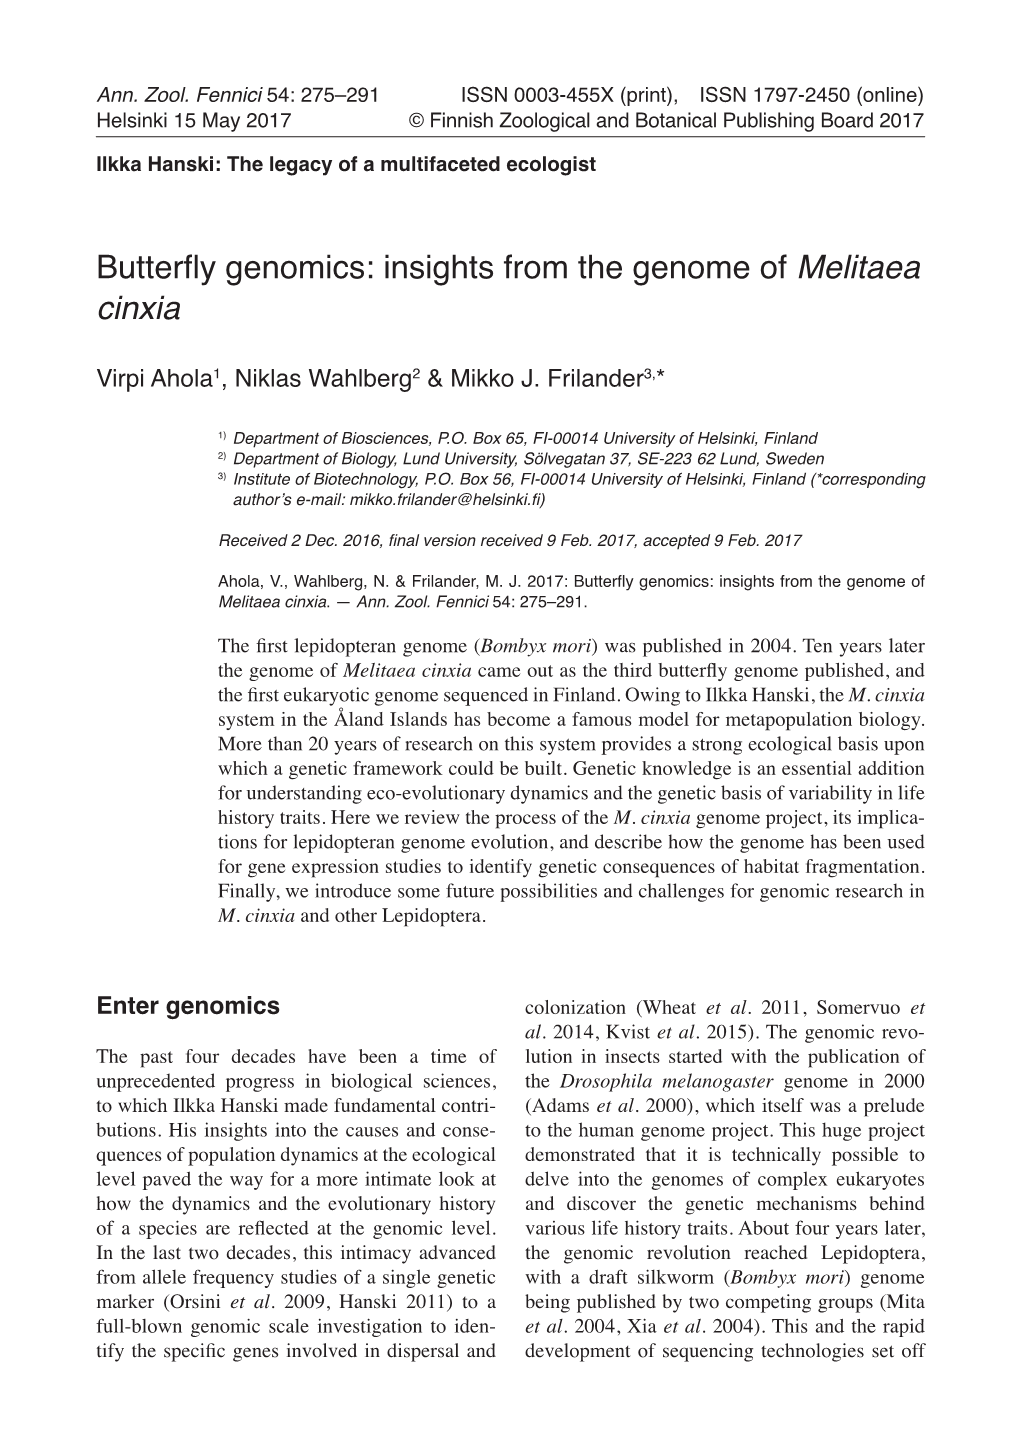 Insights from the Genome of Melitaea Cinxia